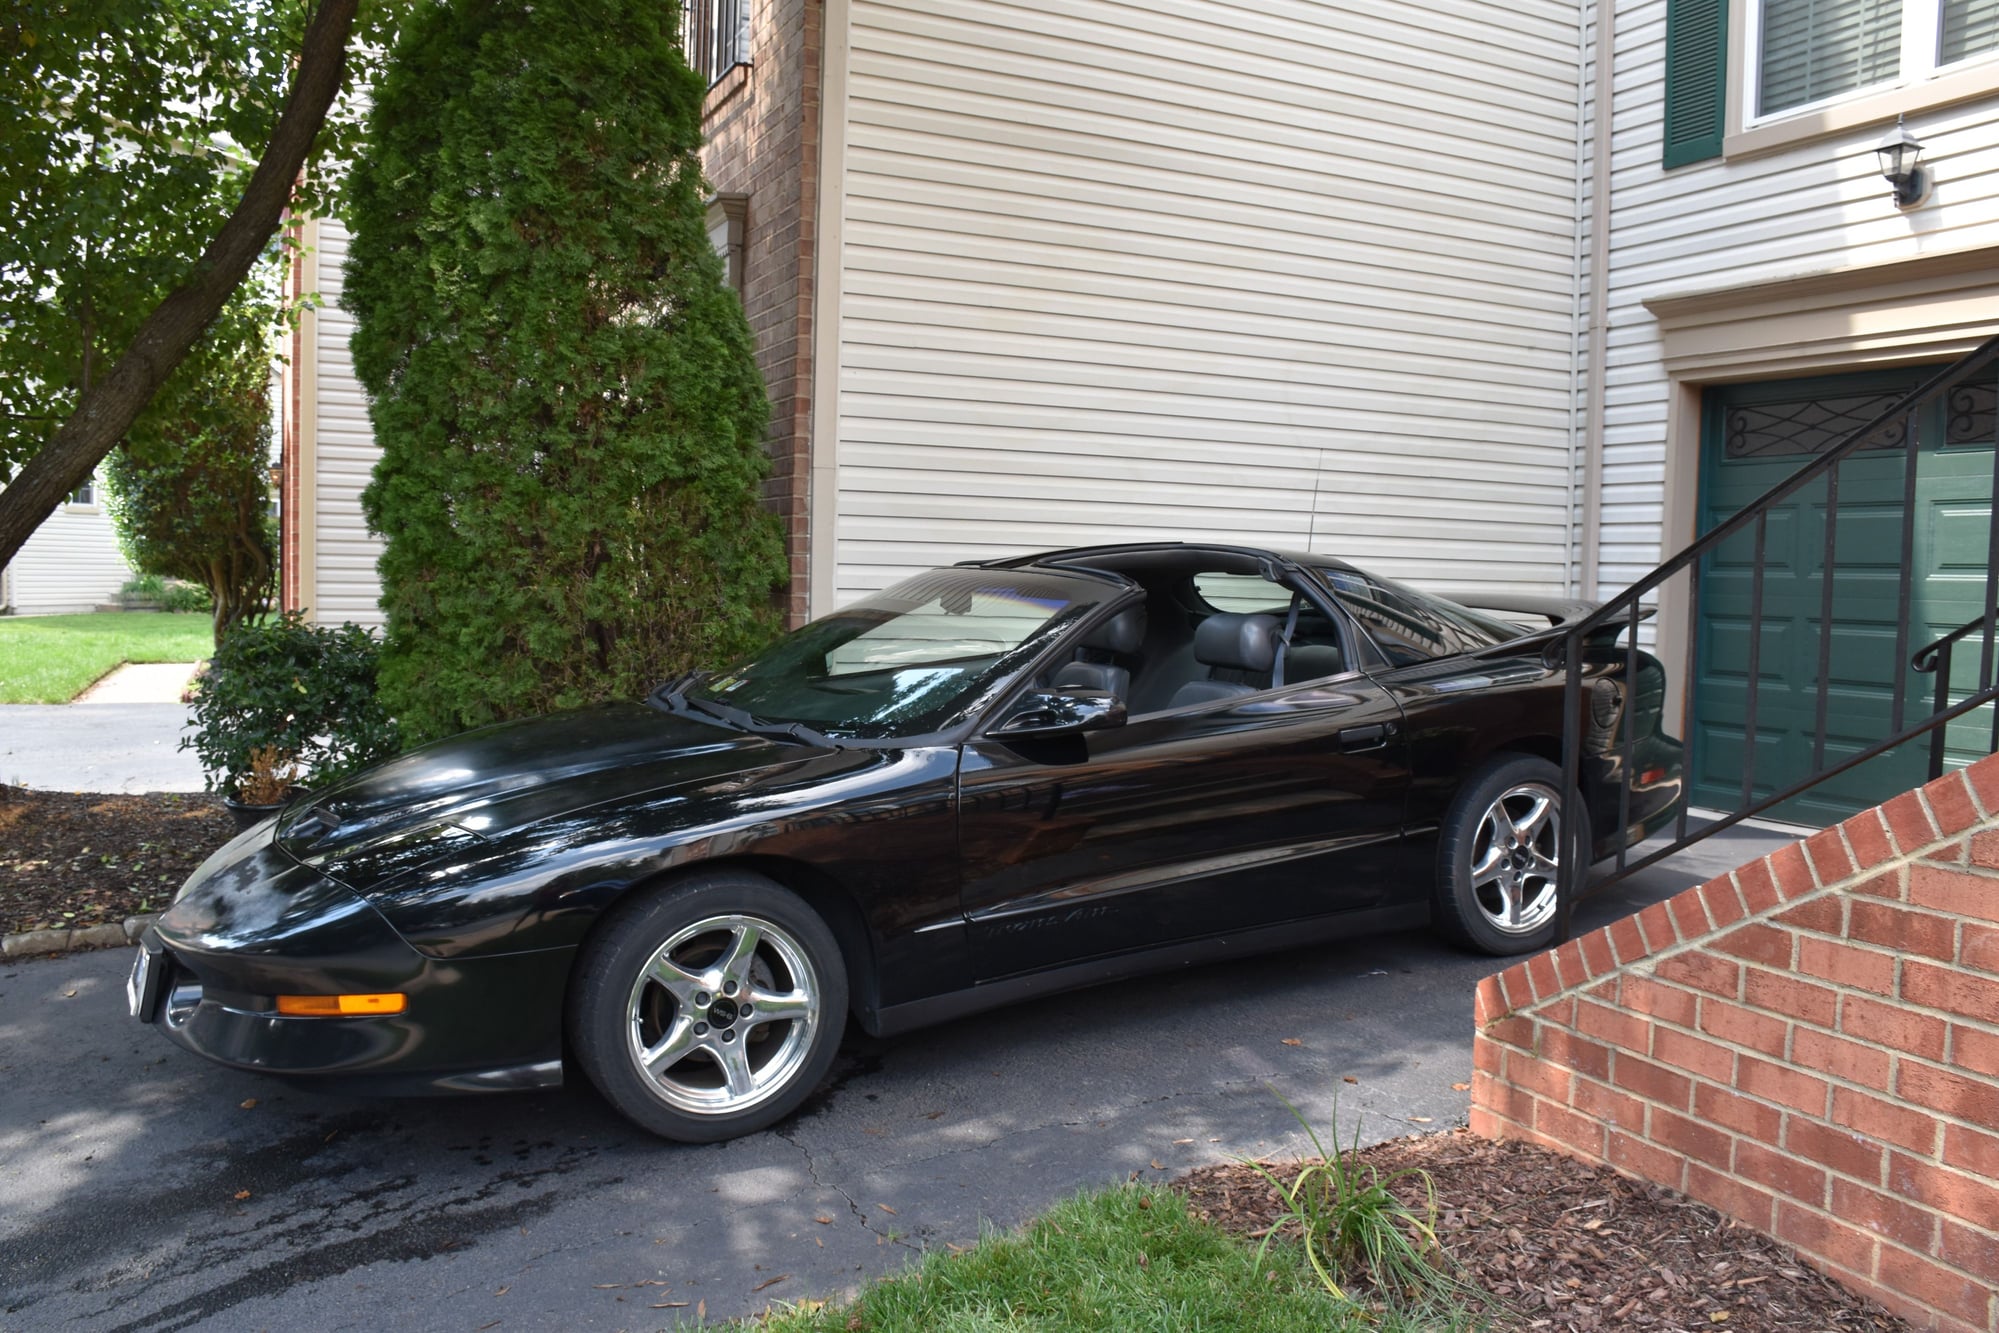 1997 Pontiac Firebird - 1997 Pontiac Firebird Trans Am WS6 T-Top Coupe with 305 HP in Virginia - Used - VIN 2G2FV22P1V2230917 - 121,850 Miles - 8 cyl - 2WD - Automatic - Coupe - Black - Ashburn, VA 20147, United States